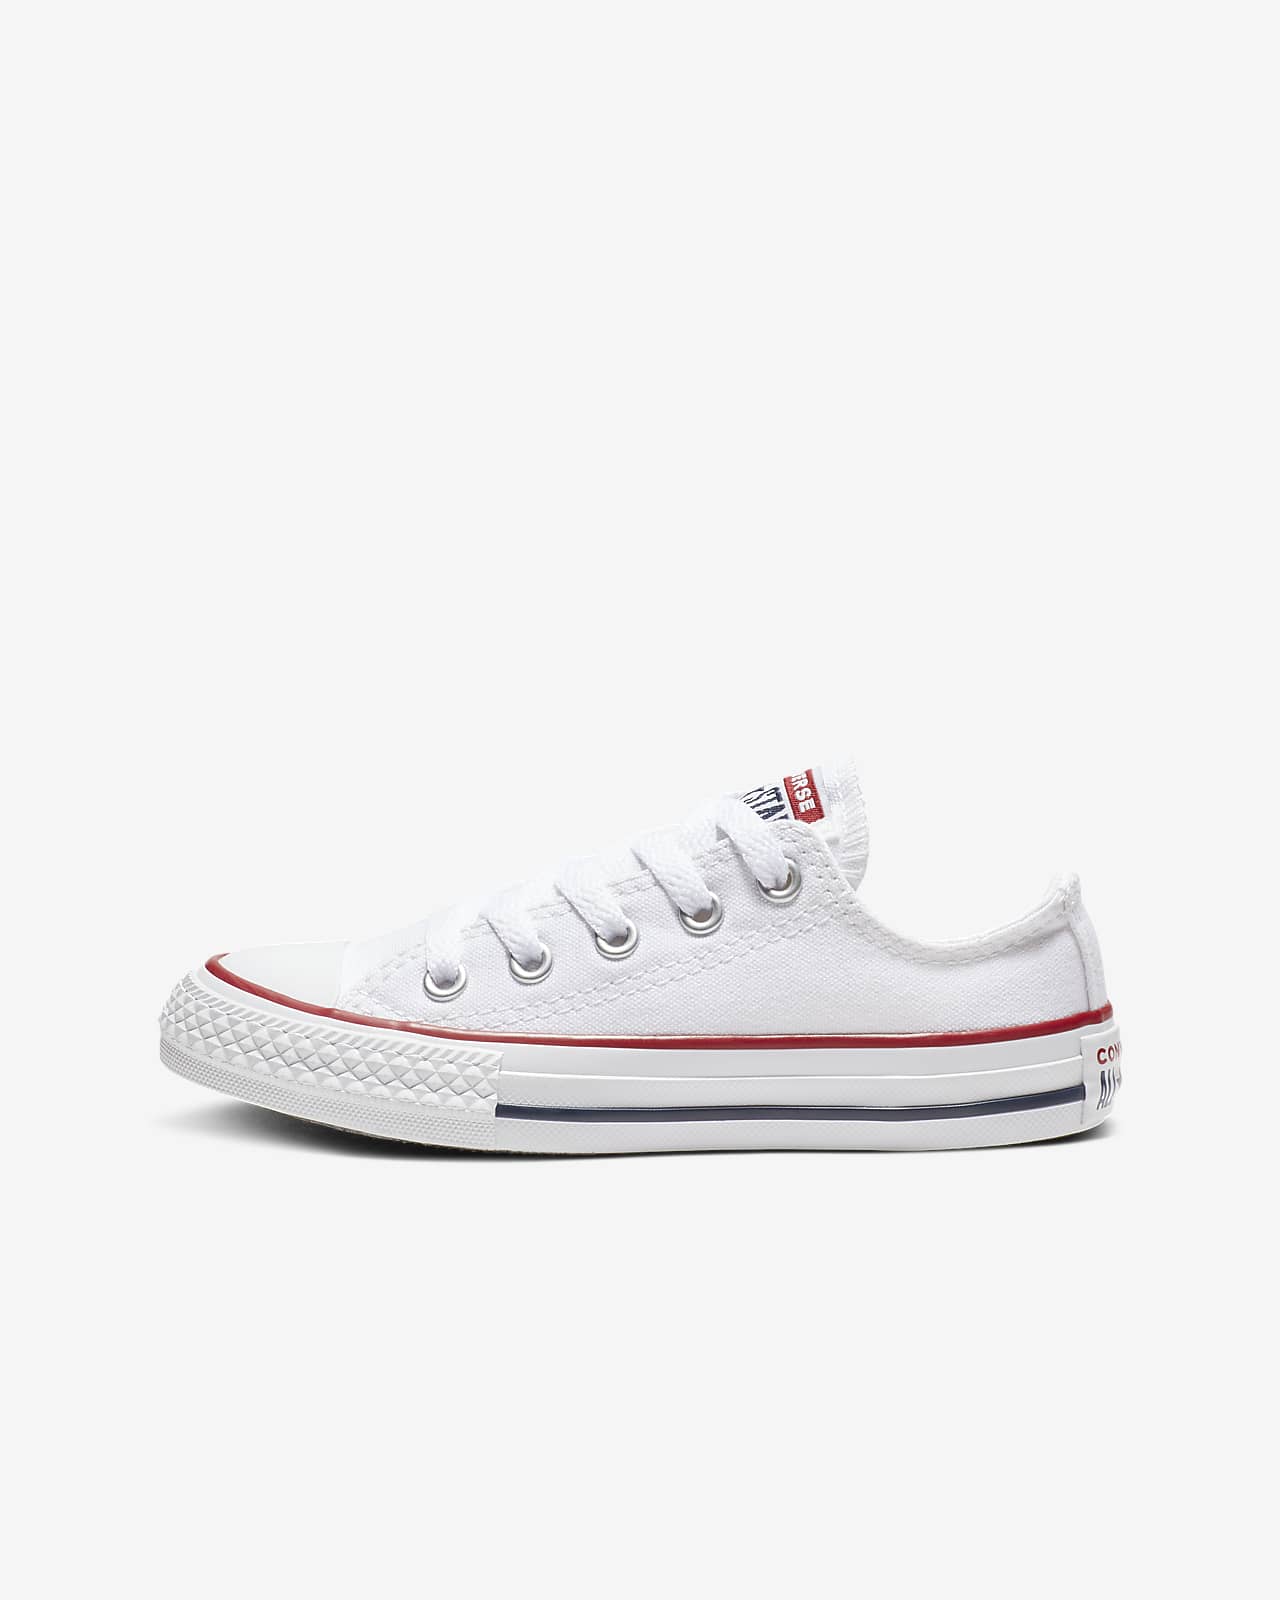 Converse Chuck Taylor All Star Low Top (10.5c-3y) Little Kids' Shoe